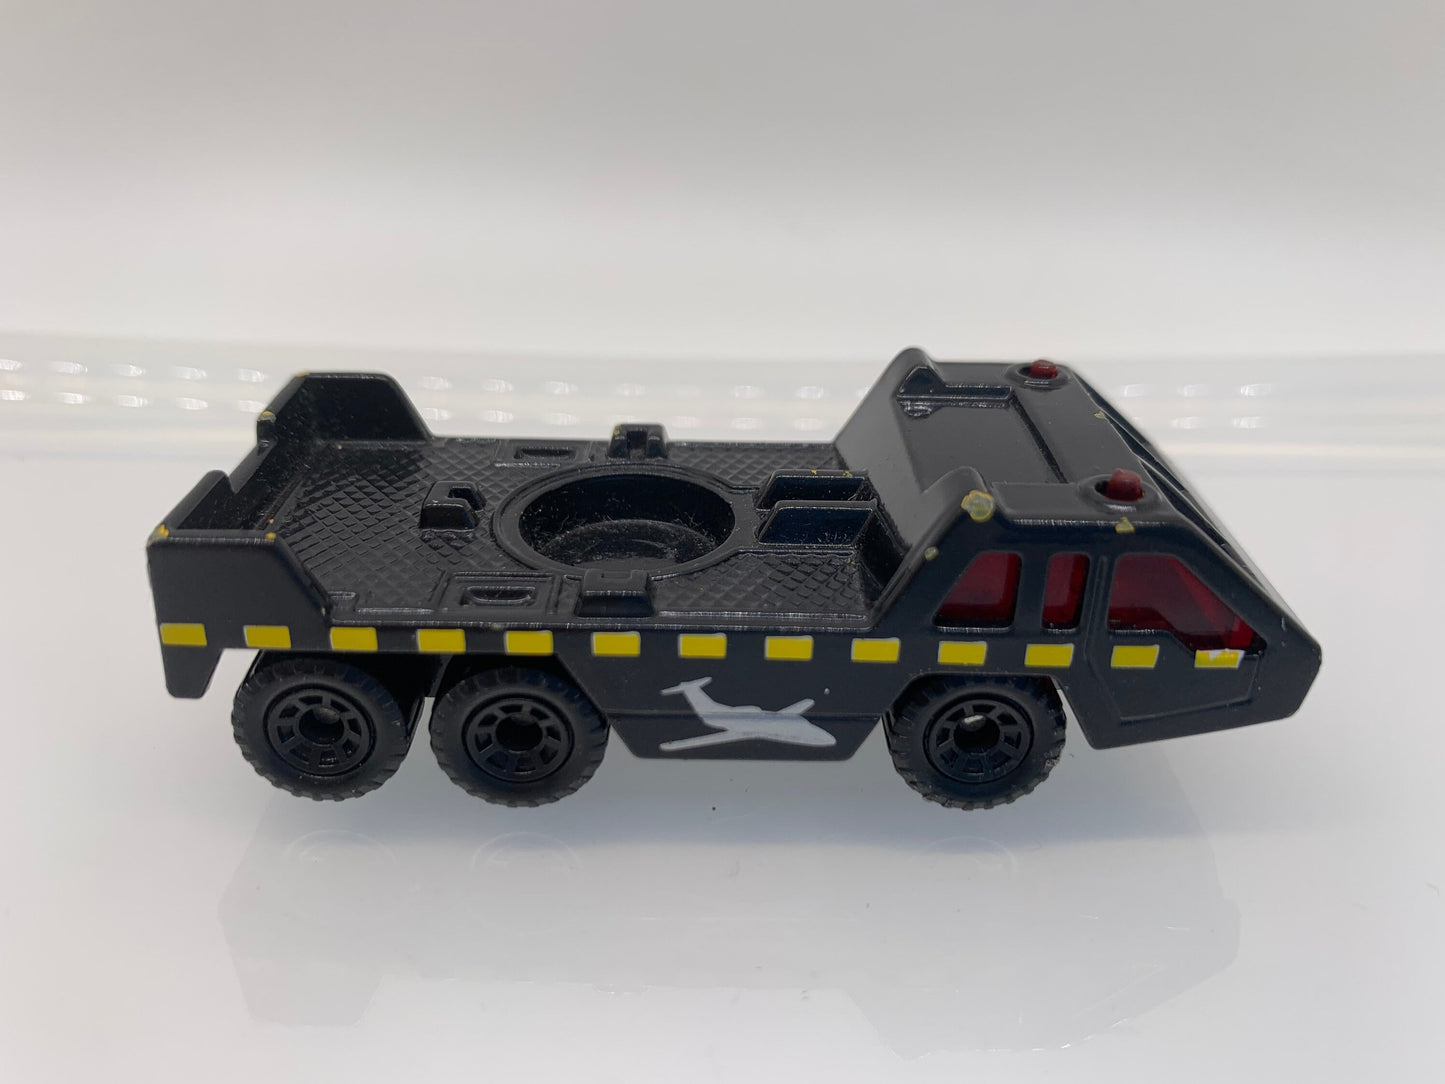 Matchbox Transporter Vehicle Black Air Traffic Perfect Birthday Gift Miniature Collectable Model Toy Car